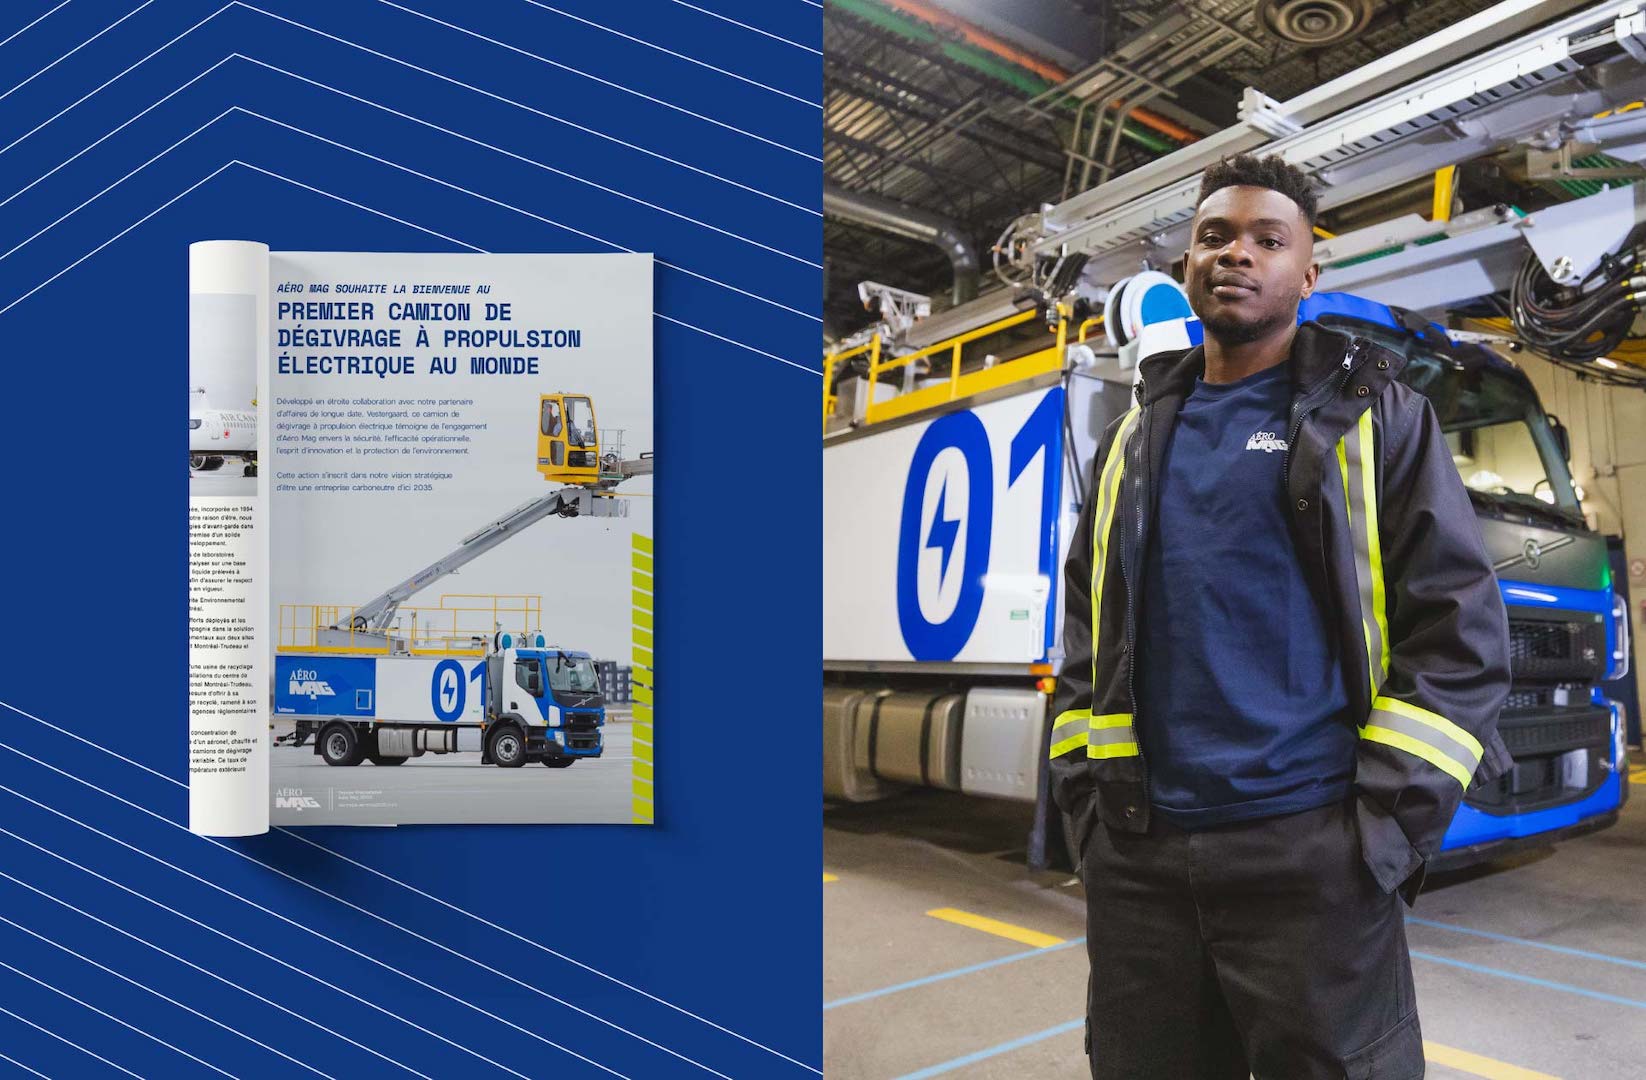 New de-icing truck magazine ad, and photo of a proud Aéro Mag's employee